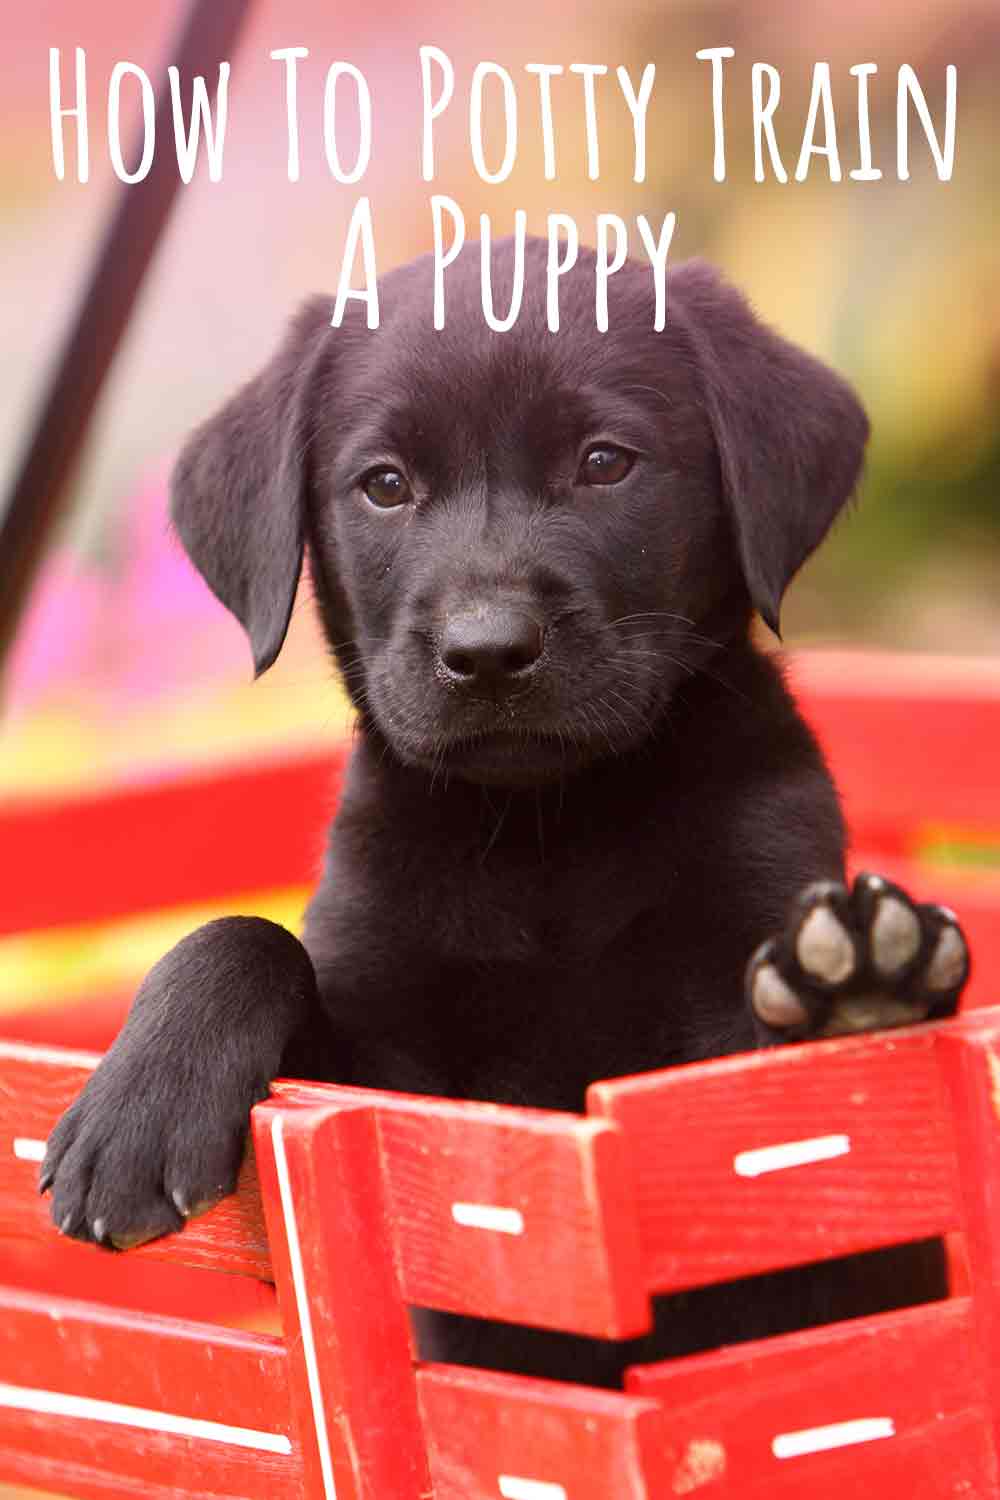 How-To-Potty-Train-A-Puppy.jpg